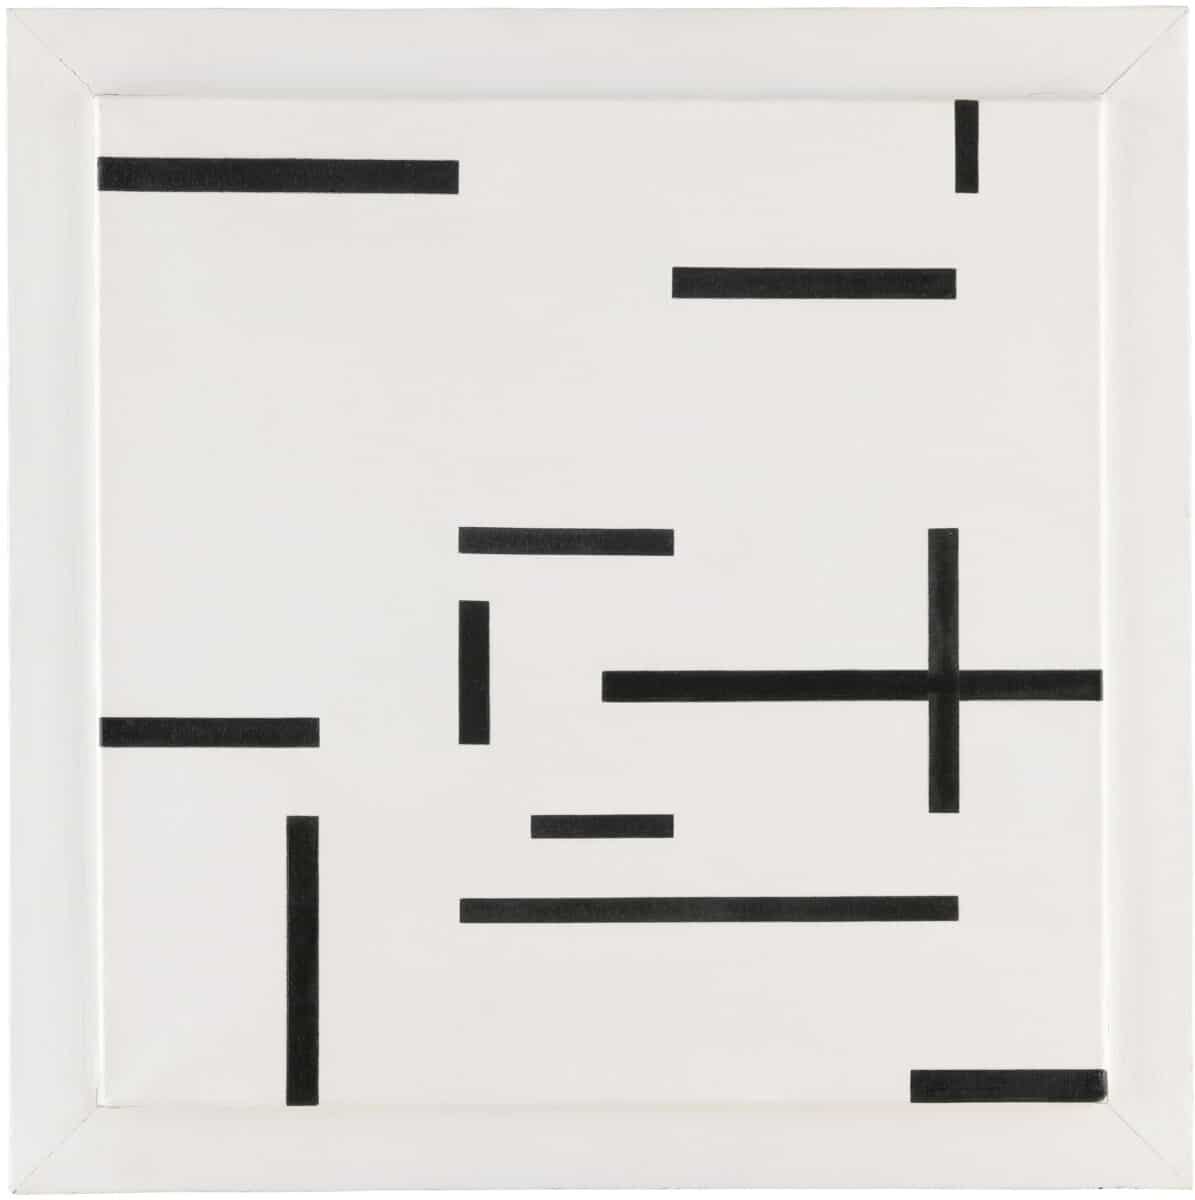 Marlow Moss,White and Black (No 27),1948.Oil on canvas, paint on wood.Purchased with the support of Pon and the Rijksmuseum Fonds: the Irma Theodora Fonds, the‘Vrouwenvan het Rijksmuseum’ Fonds (‘Women of the Rijksmuseum’ Fund), and a privatebenefactor